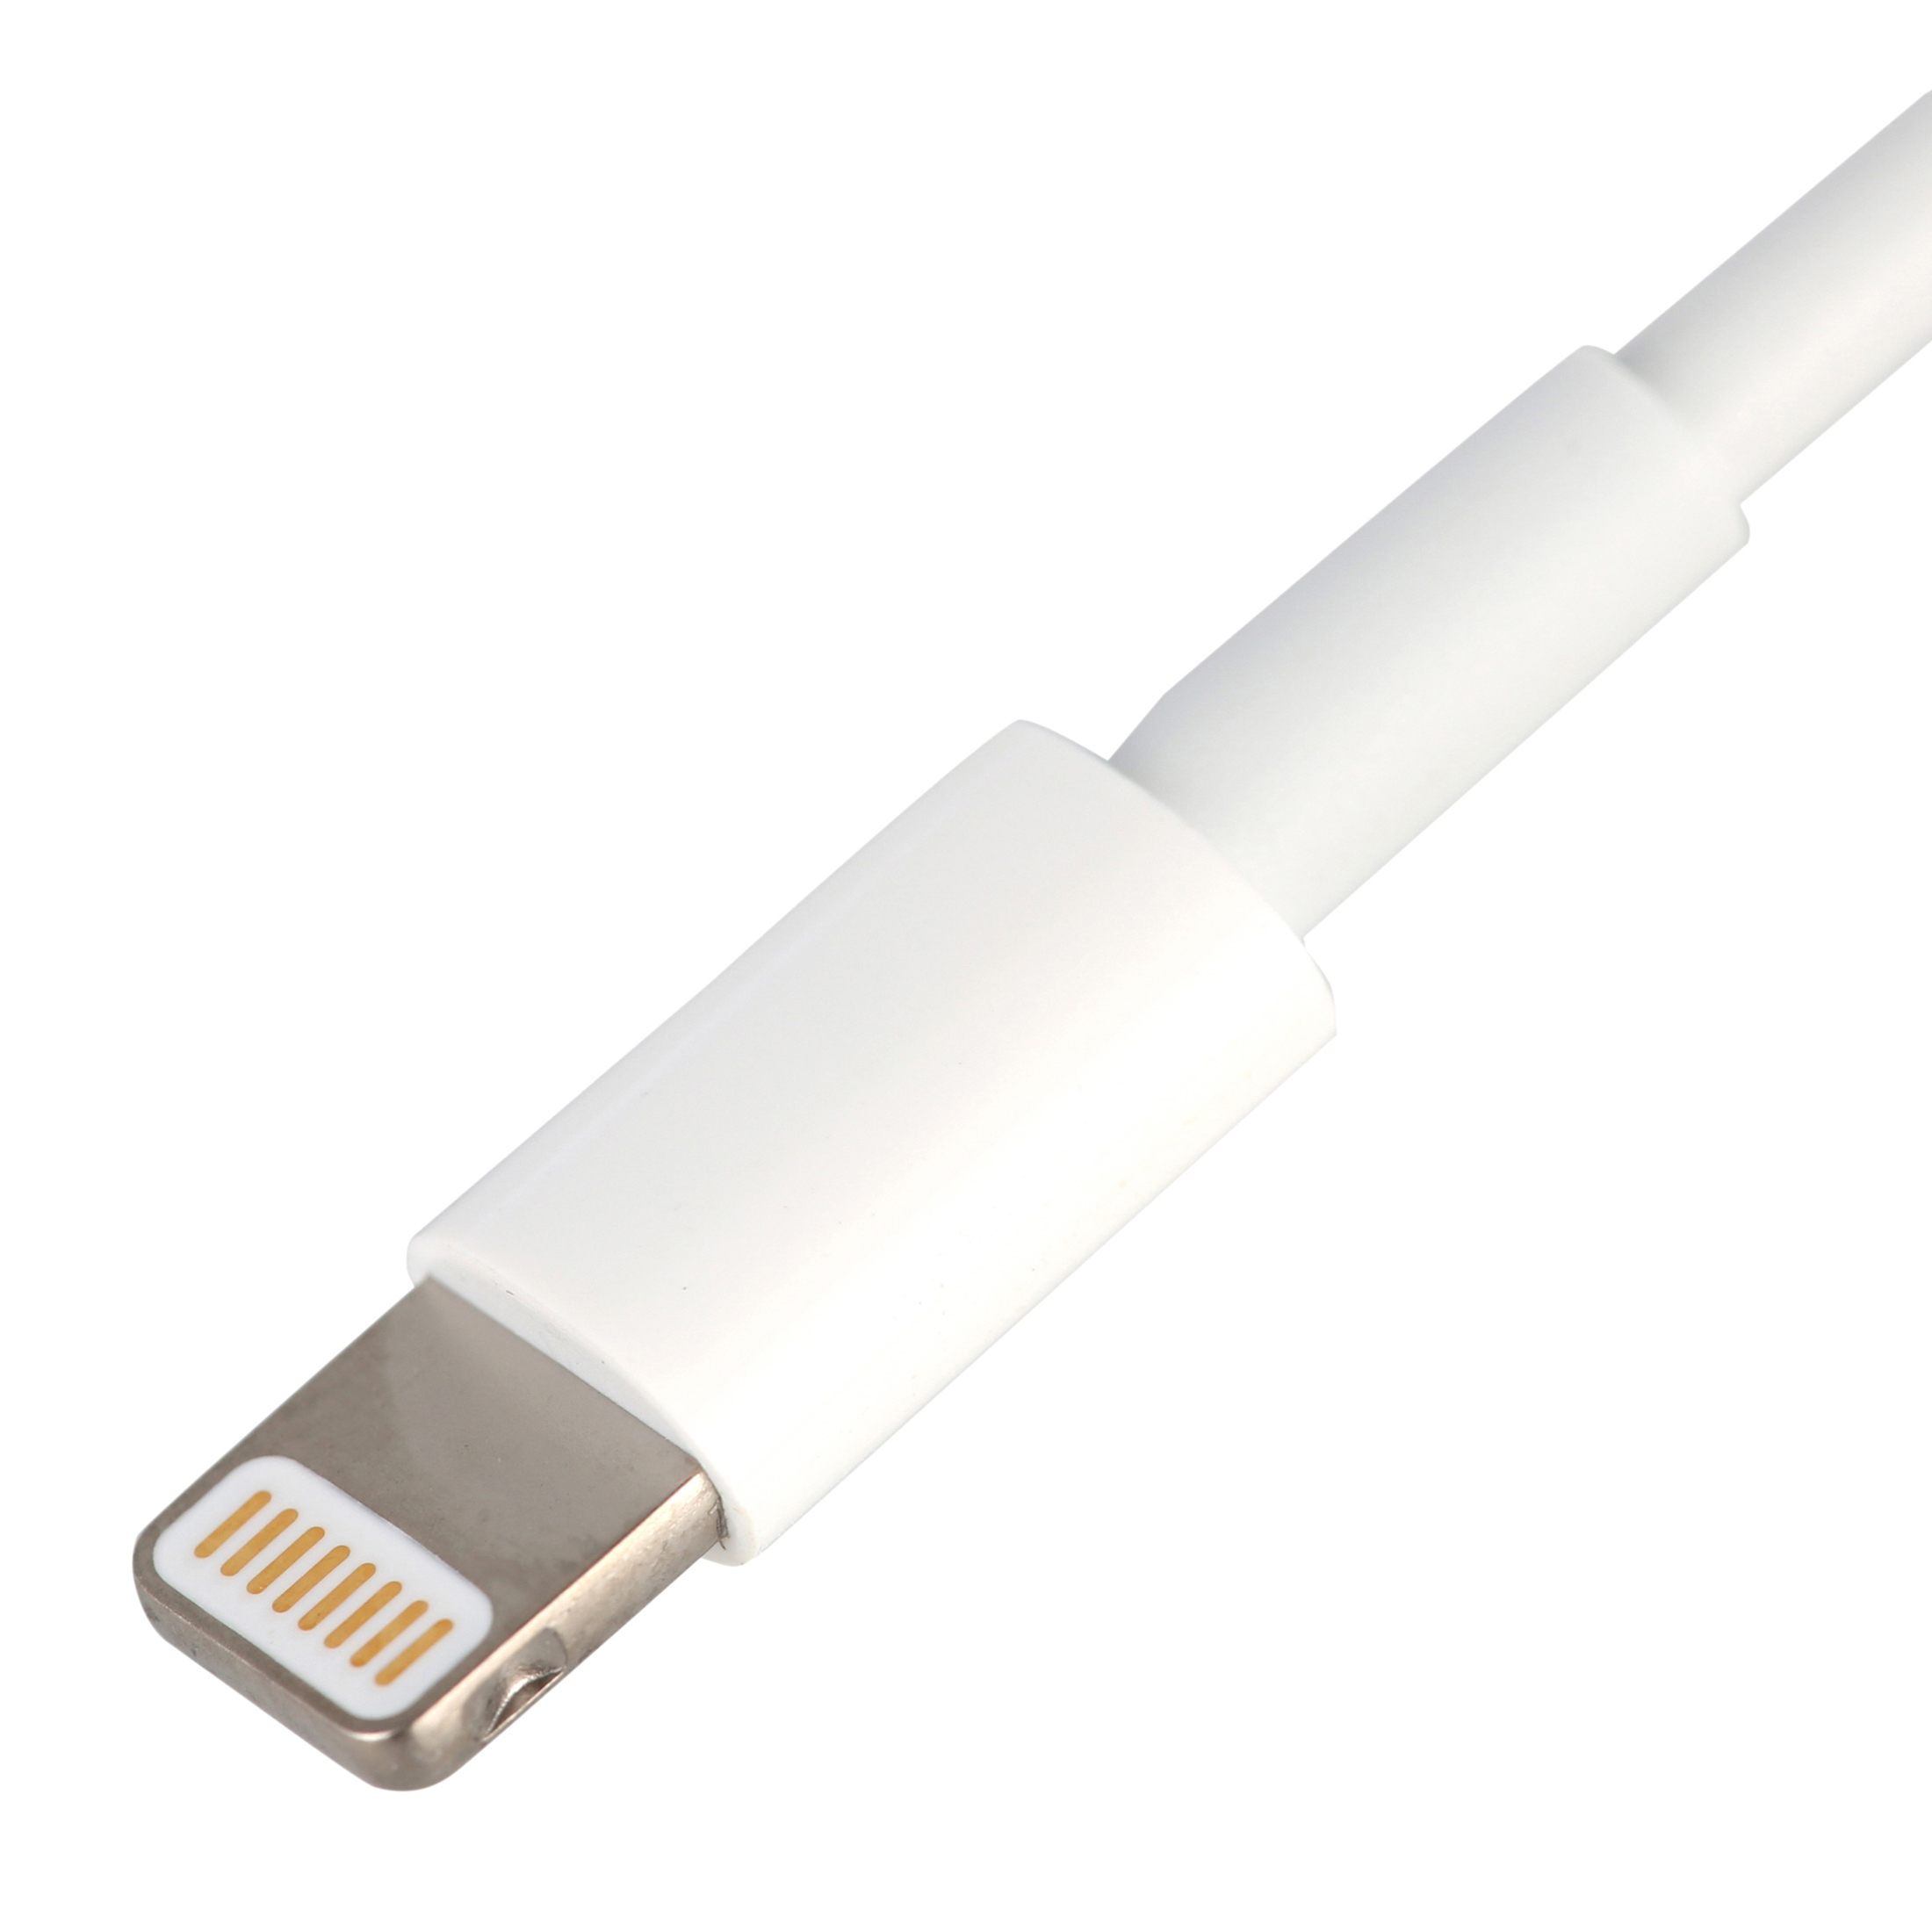 Apple Lightning to USB Cable (1m) - White - image 4 of 4